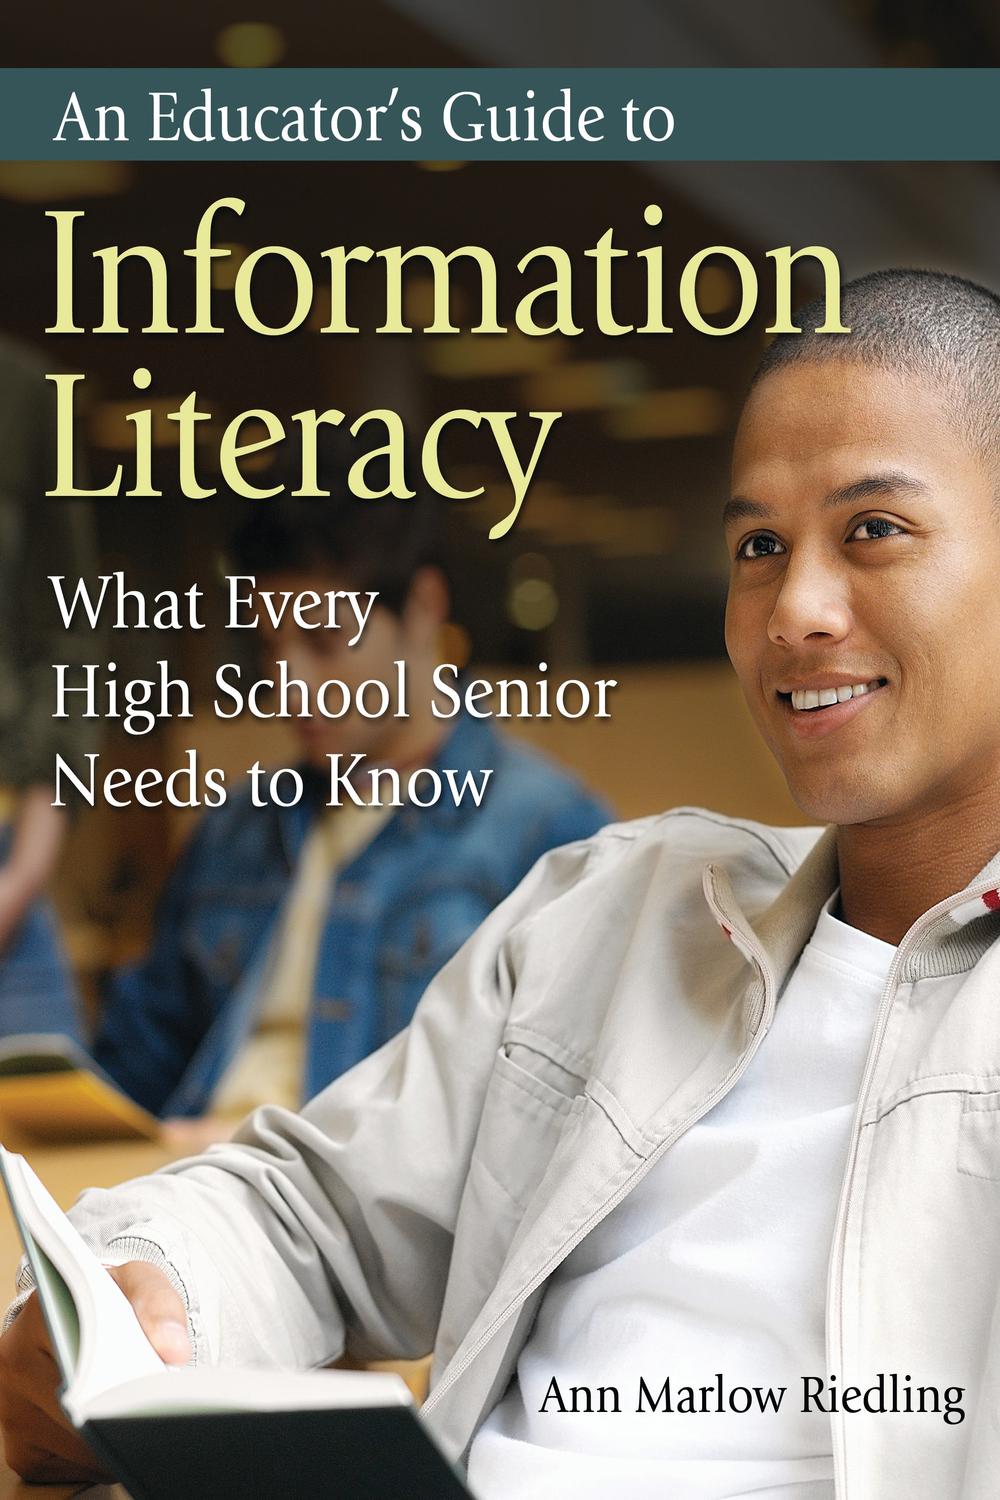 An Educator's Guide to Information Literacy - Ann Marlow Riedling Ph.D.